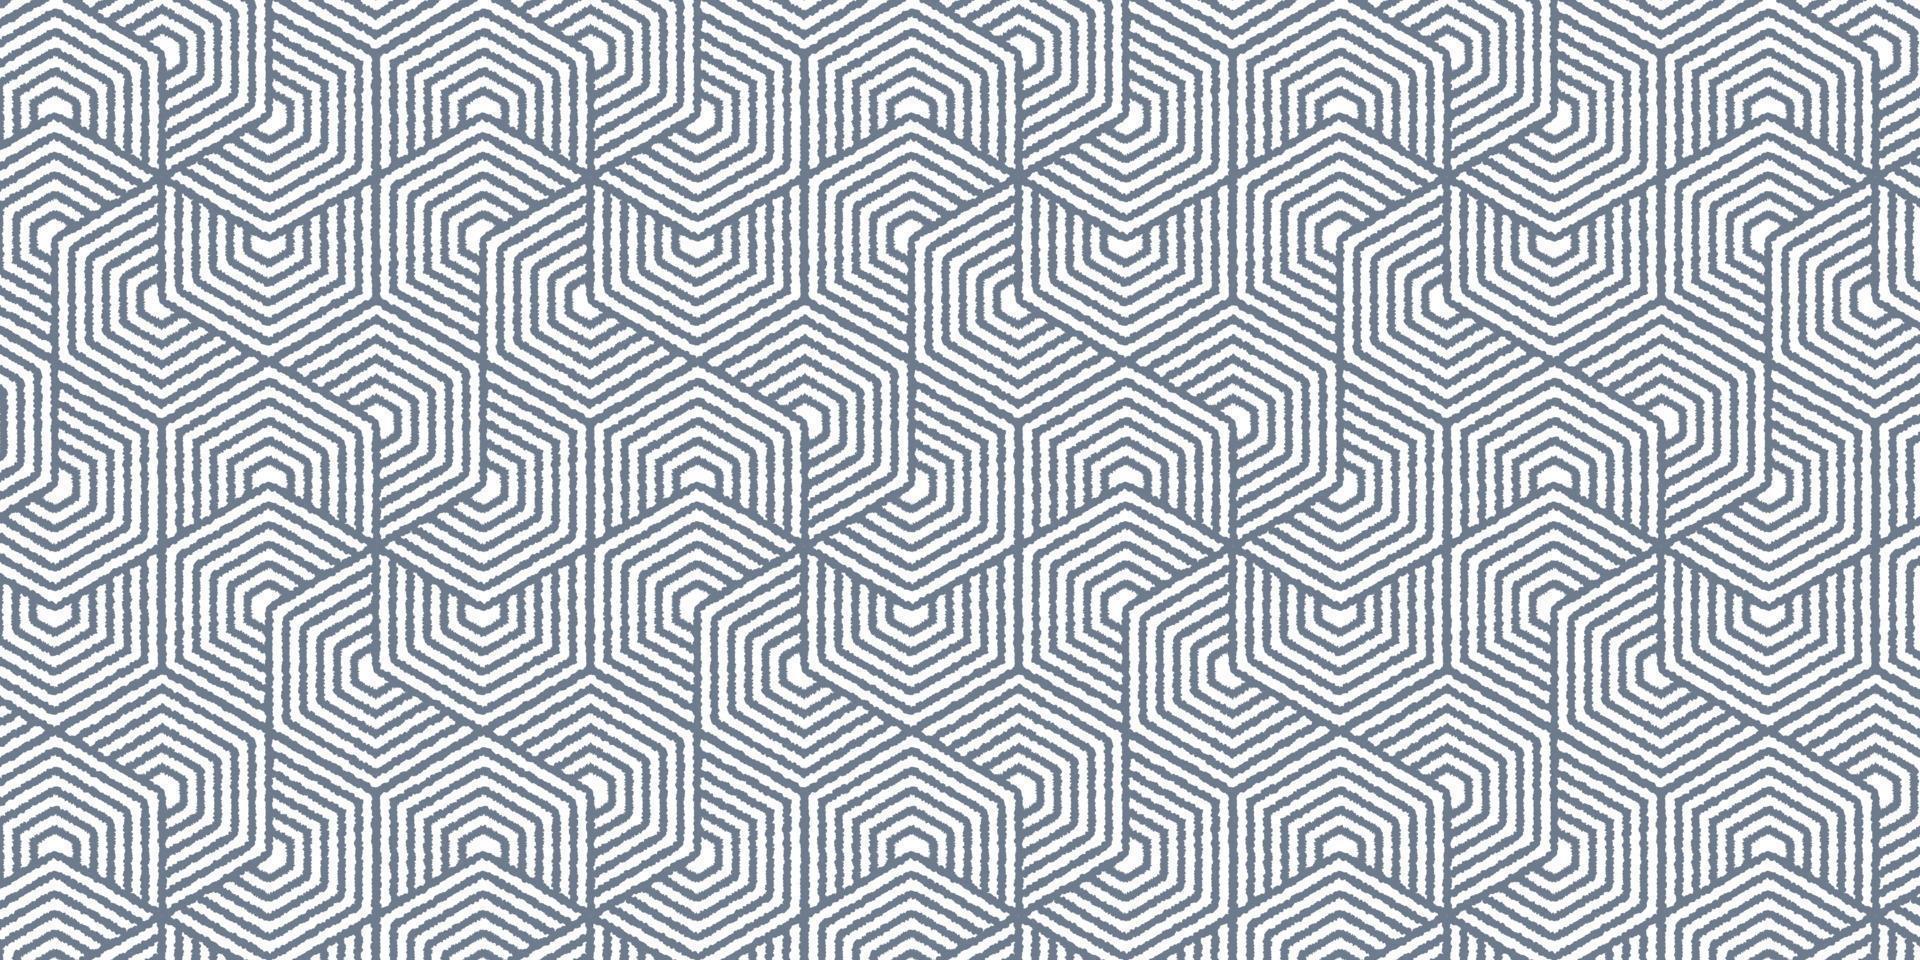 Geometric pattern with wavy stripes seamless background vector